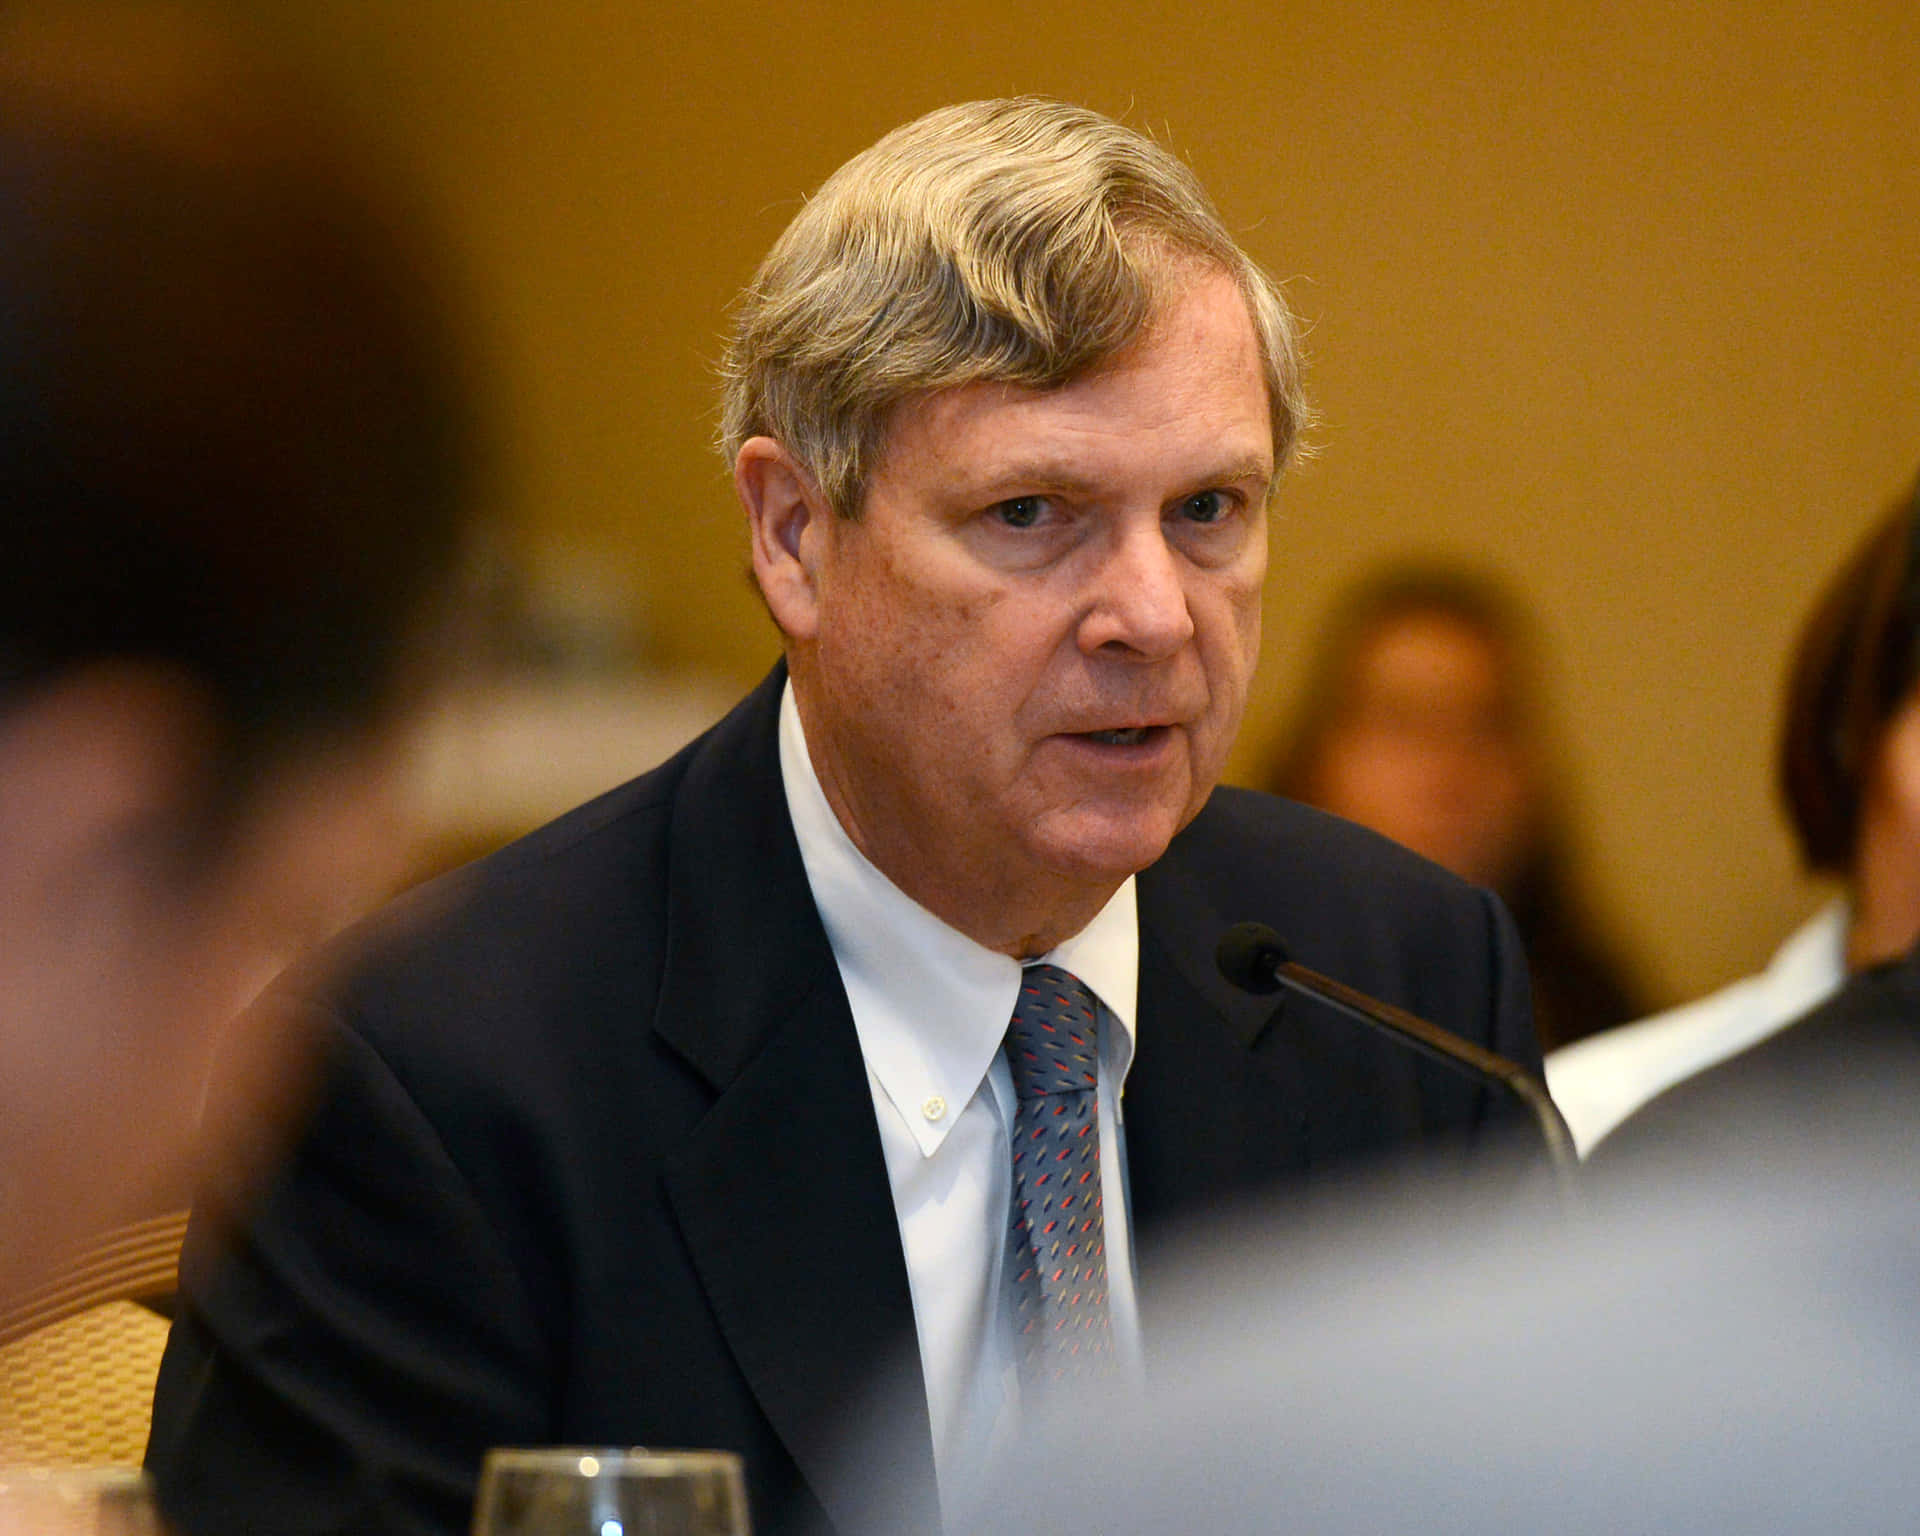 Tom Vilsack With Serious Expression Wallpaper